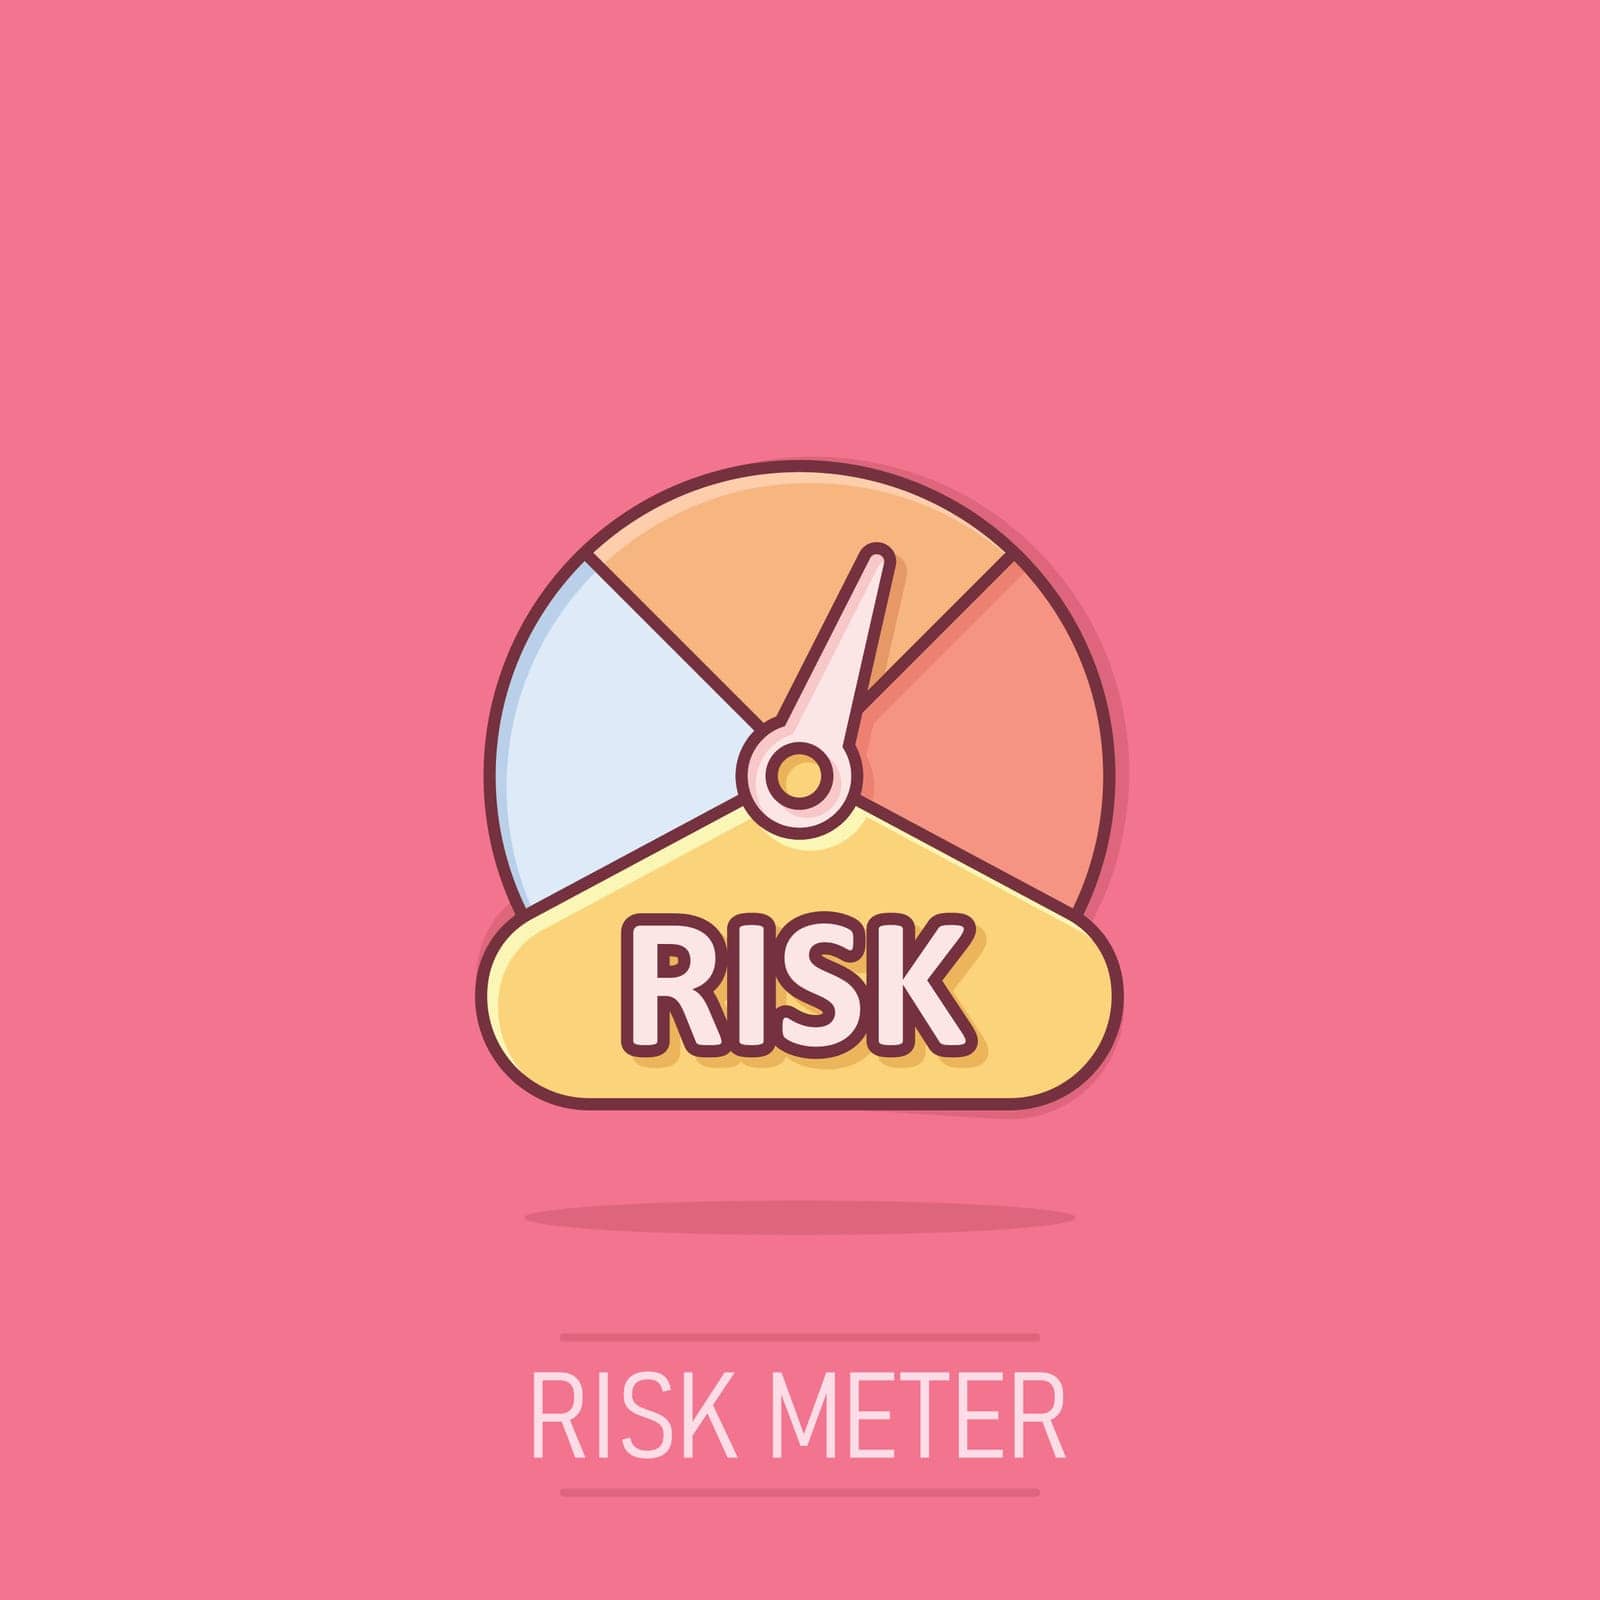 Risk meter icon in comic style. Rating indicator cartoon vector illustration on isolated background. Fuel level sign splash effect business concept.